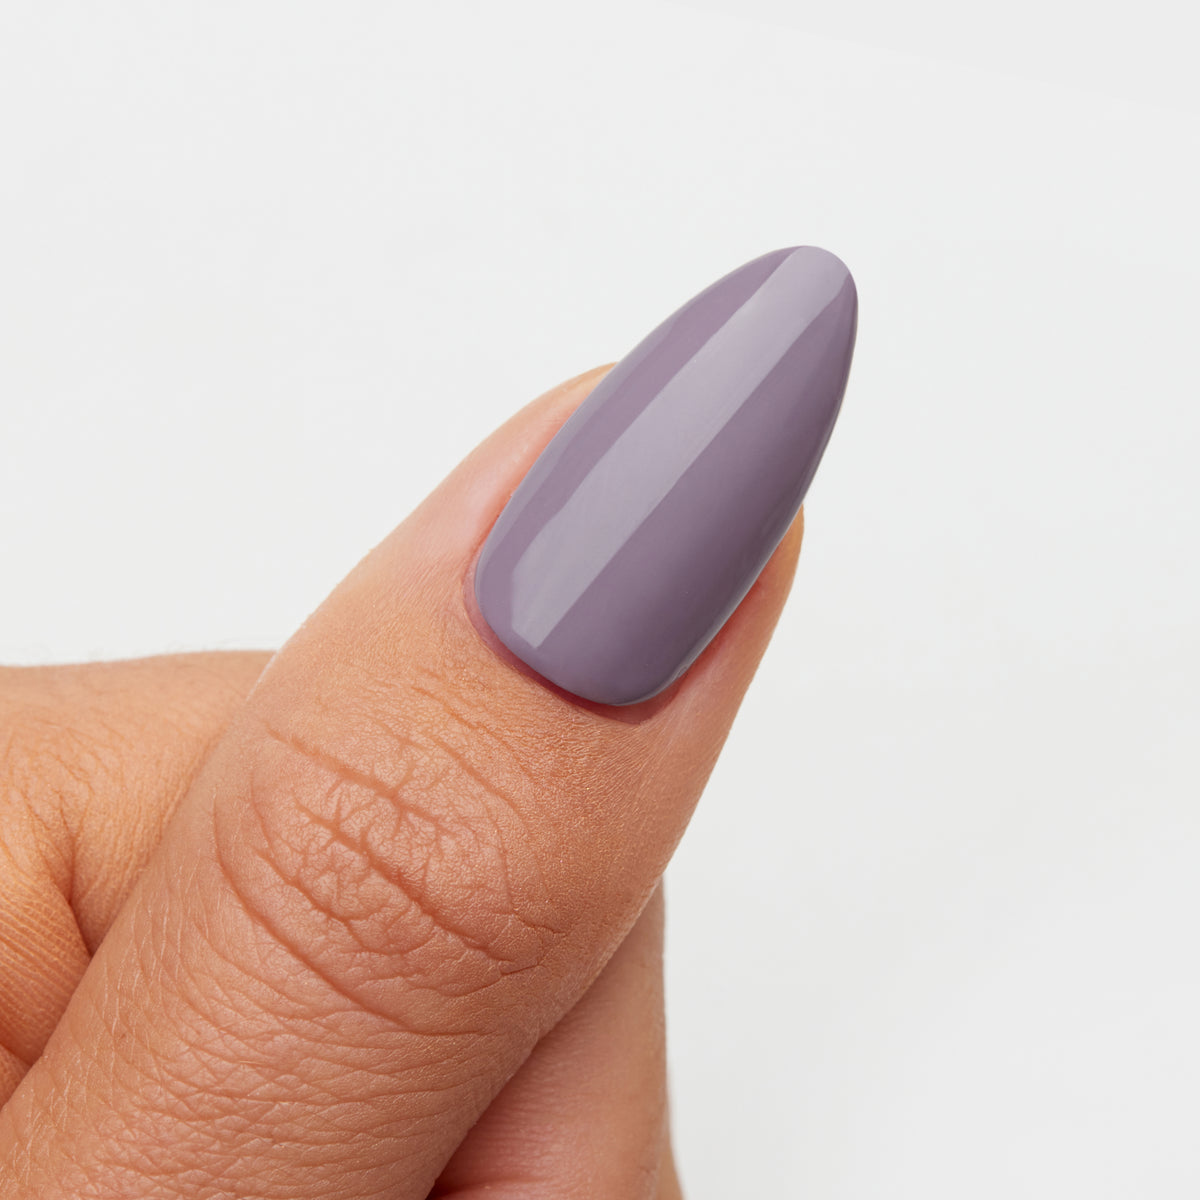 Gelous Moody in Mauve gel nail polish swatch - photographed in New Zealand